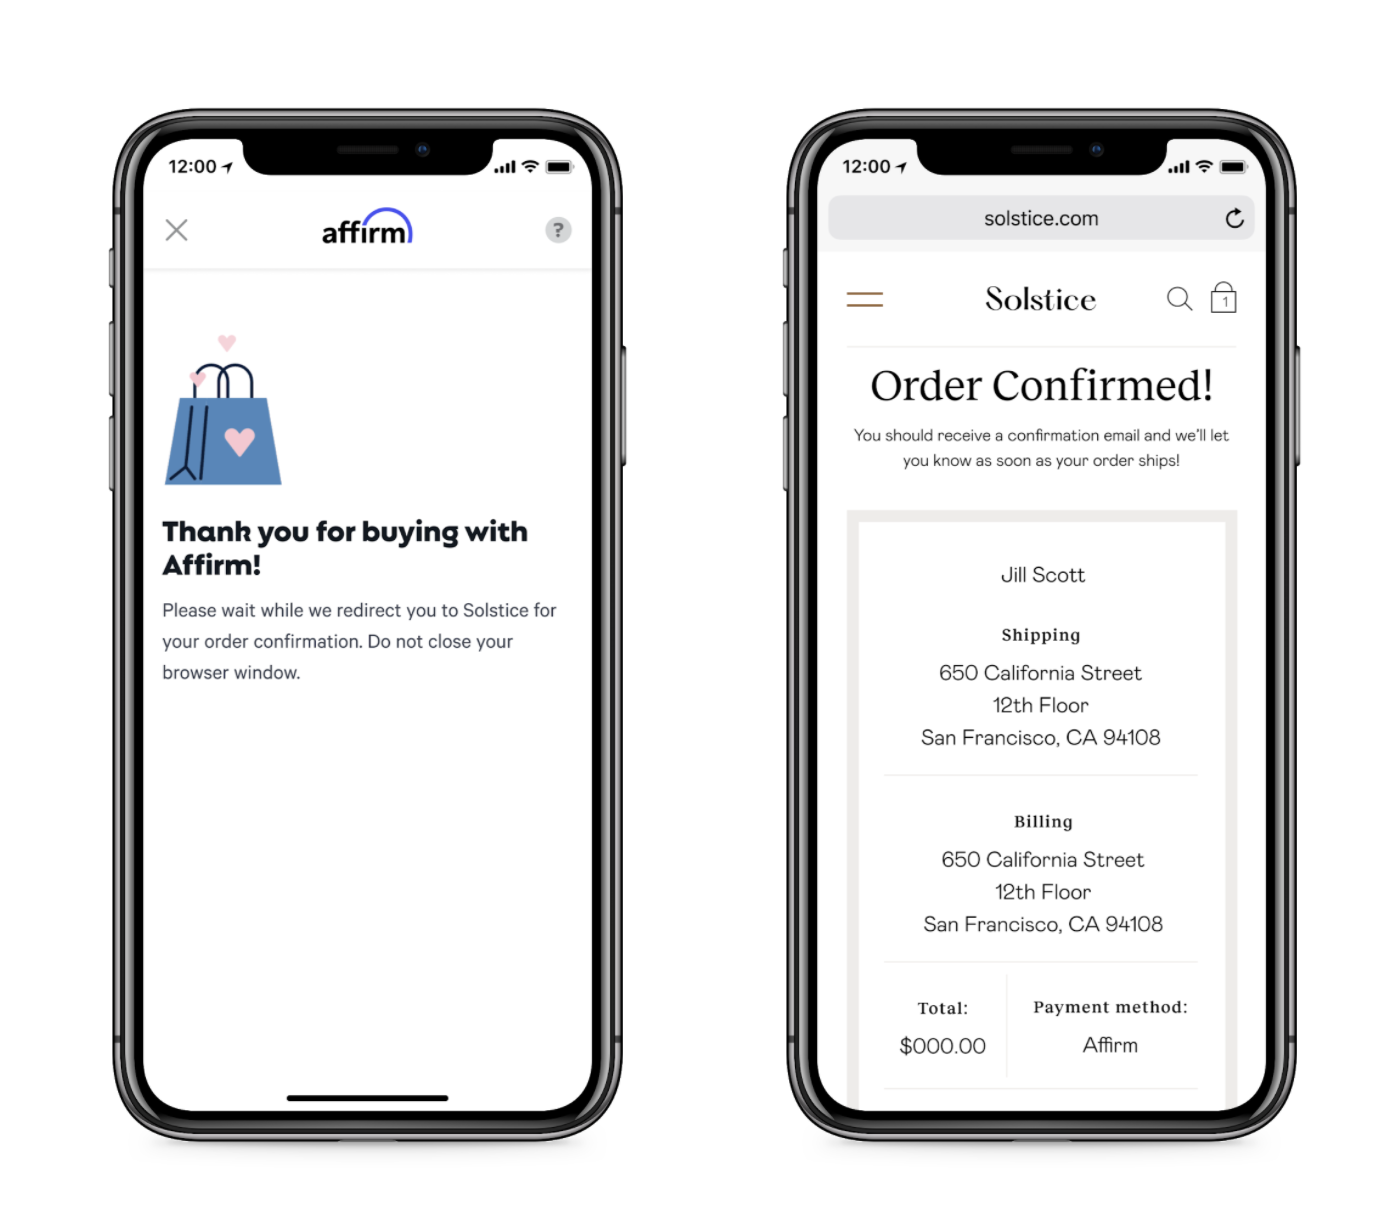 Affirm payment and order confirmed